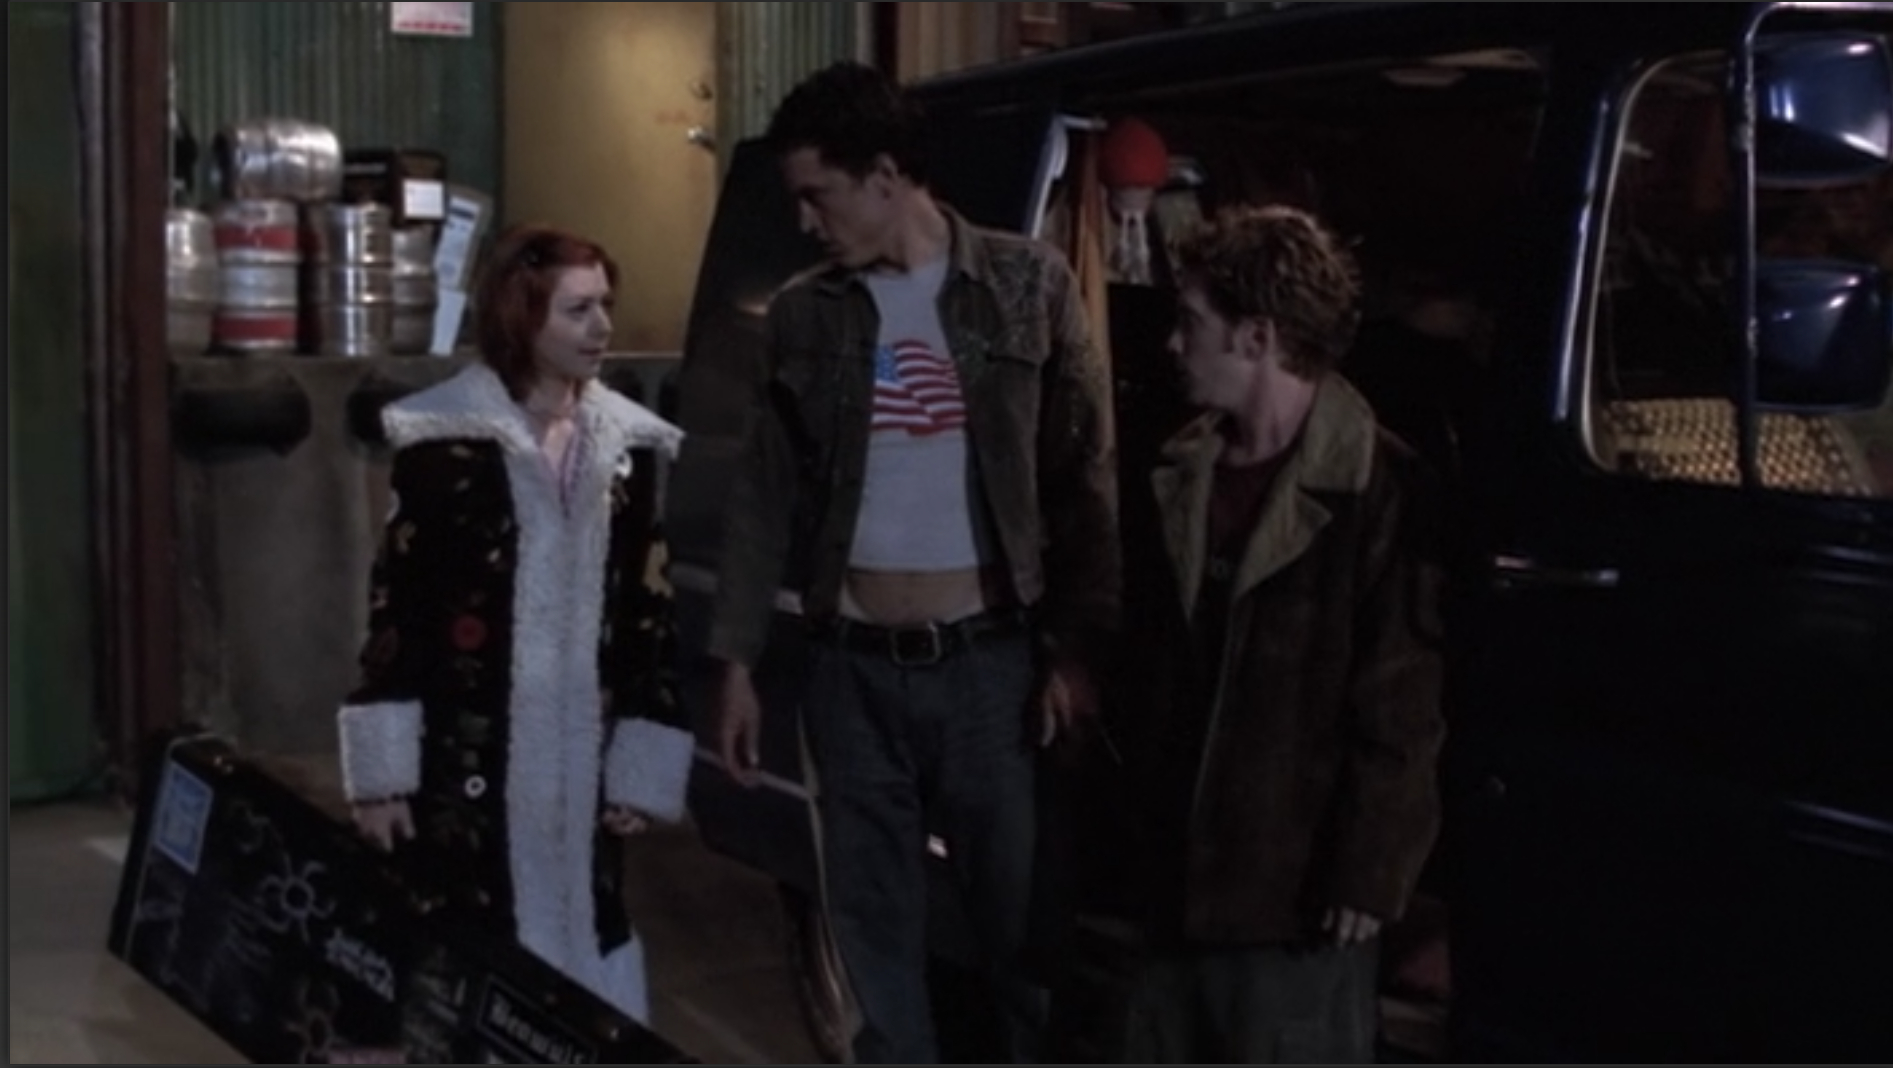 Burma Fern Eastern The Big Damn Buffy Rewatch S04E03: “The Harsh Light Of Day” – Trout Nation